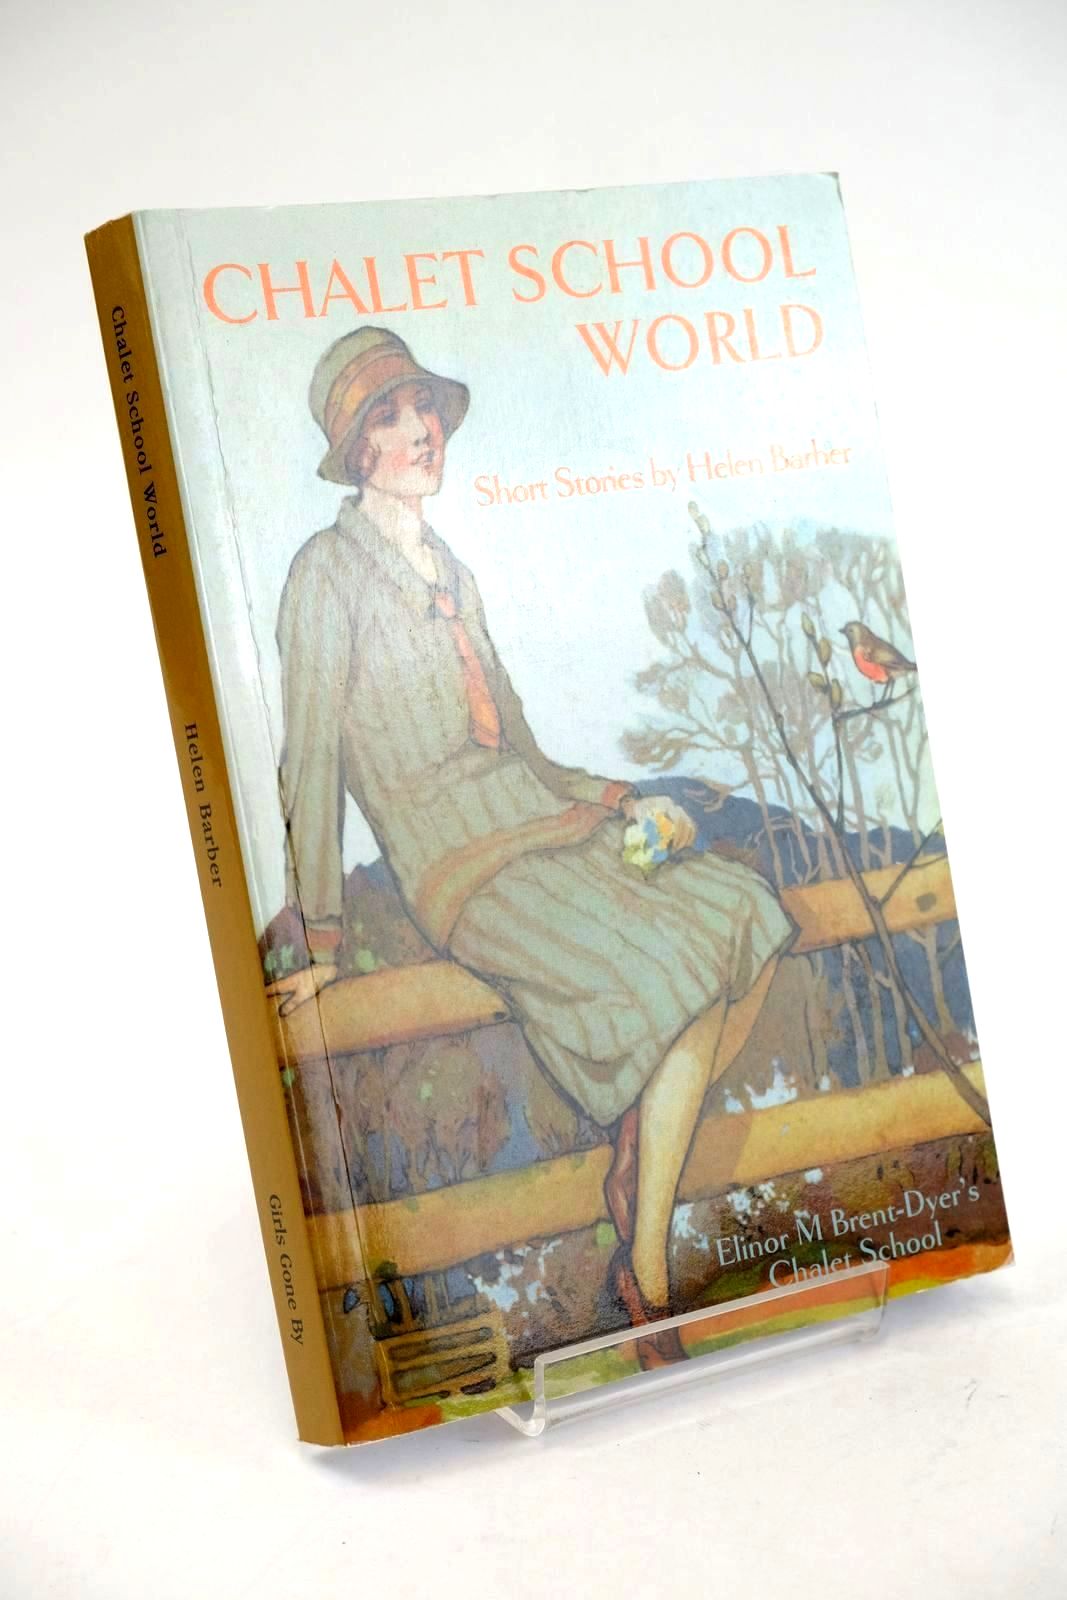 Photo of CHALET SCHOOL WORLD written by Brent-Dyer, Elinor M. Barber, Helen published by Girls Gone By (STOCK CODE: 1324269)  for sale by Stella & Rose's Books